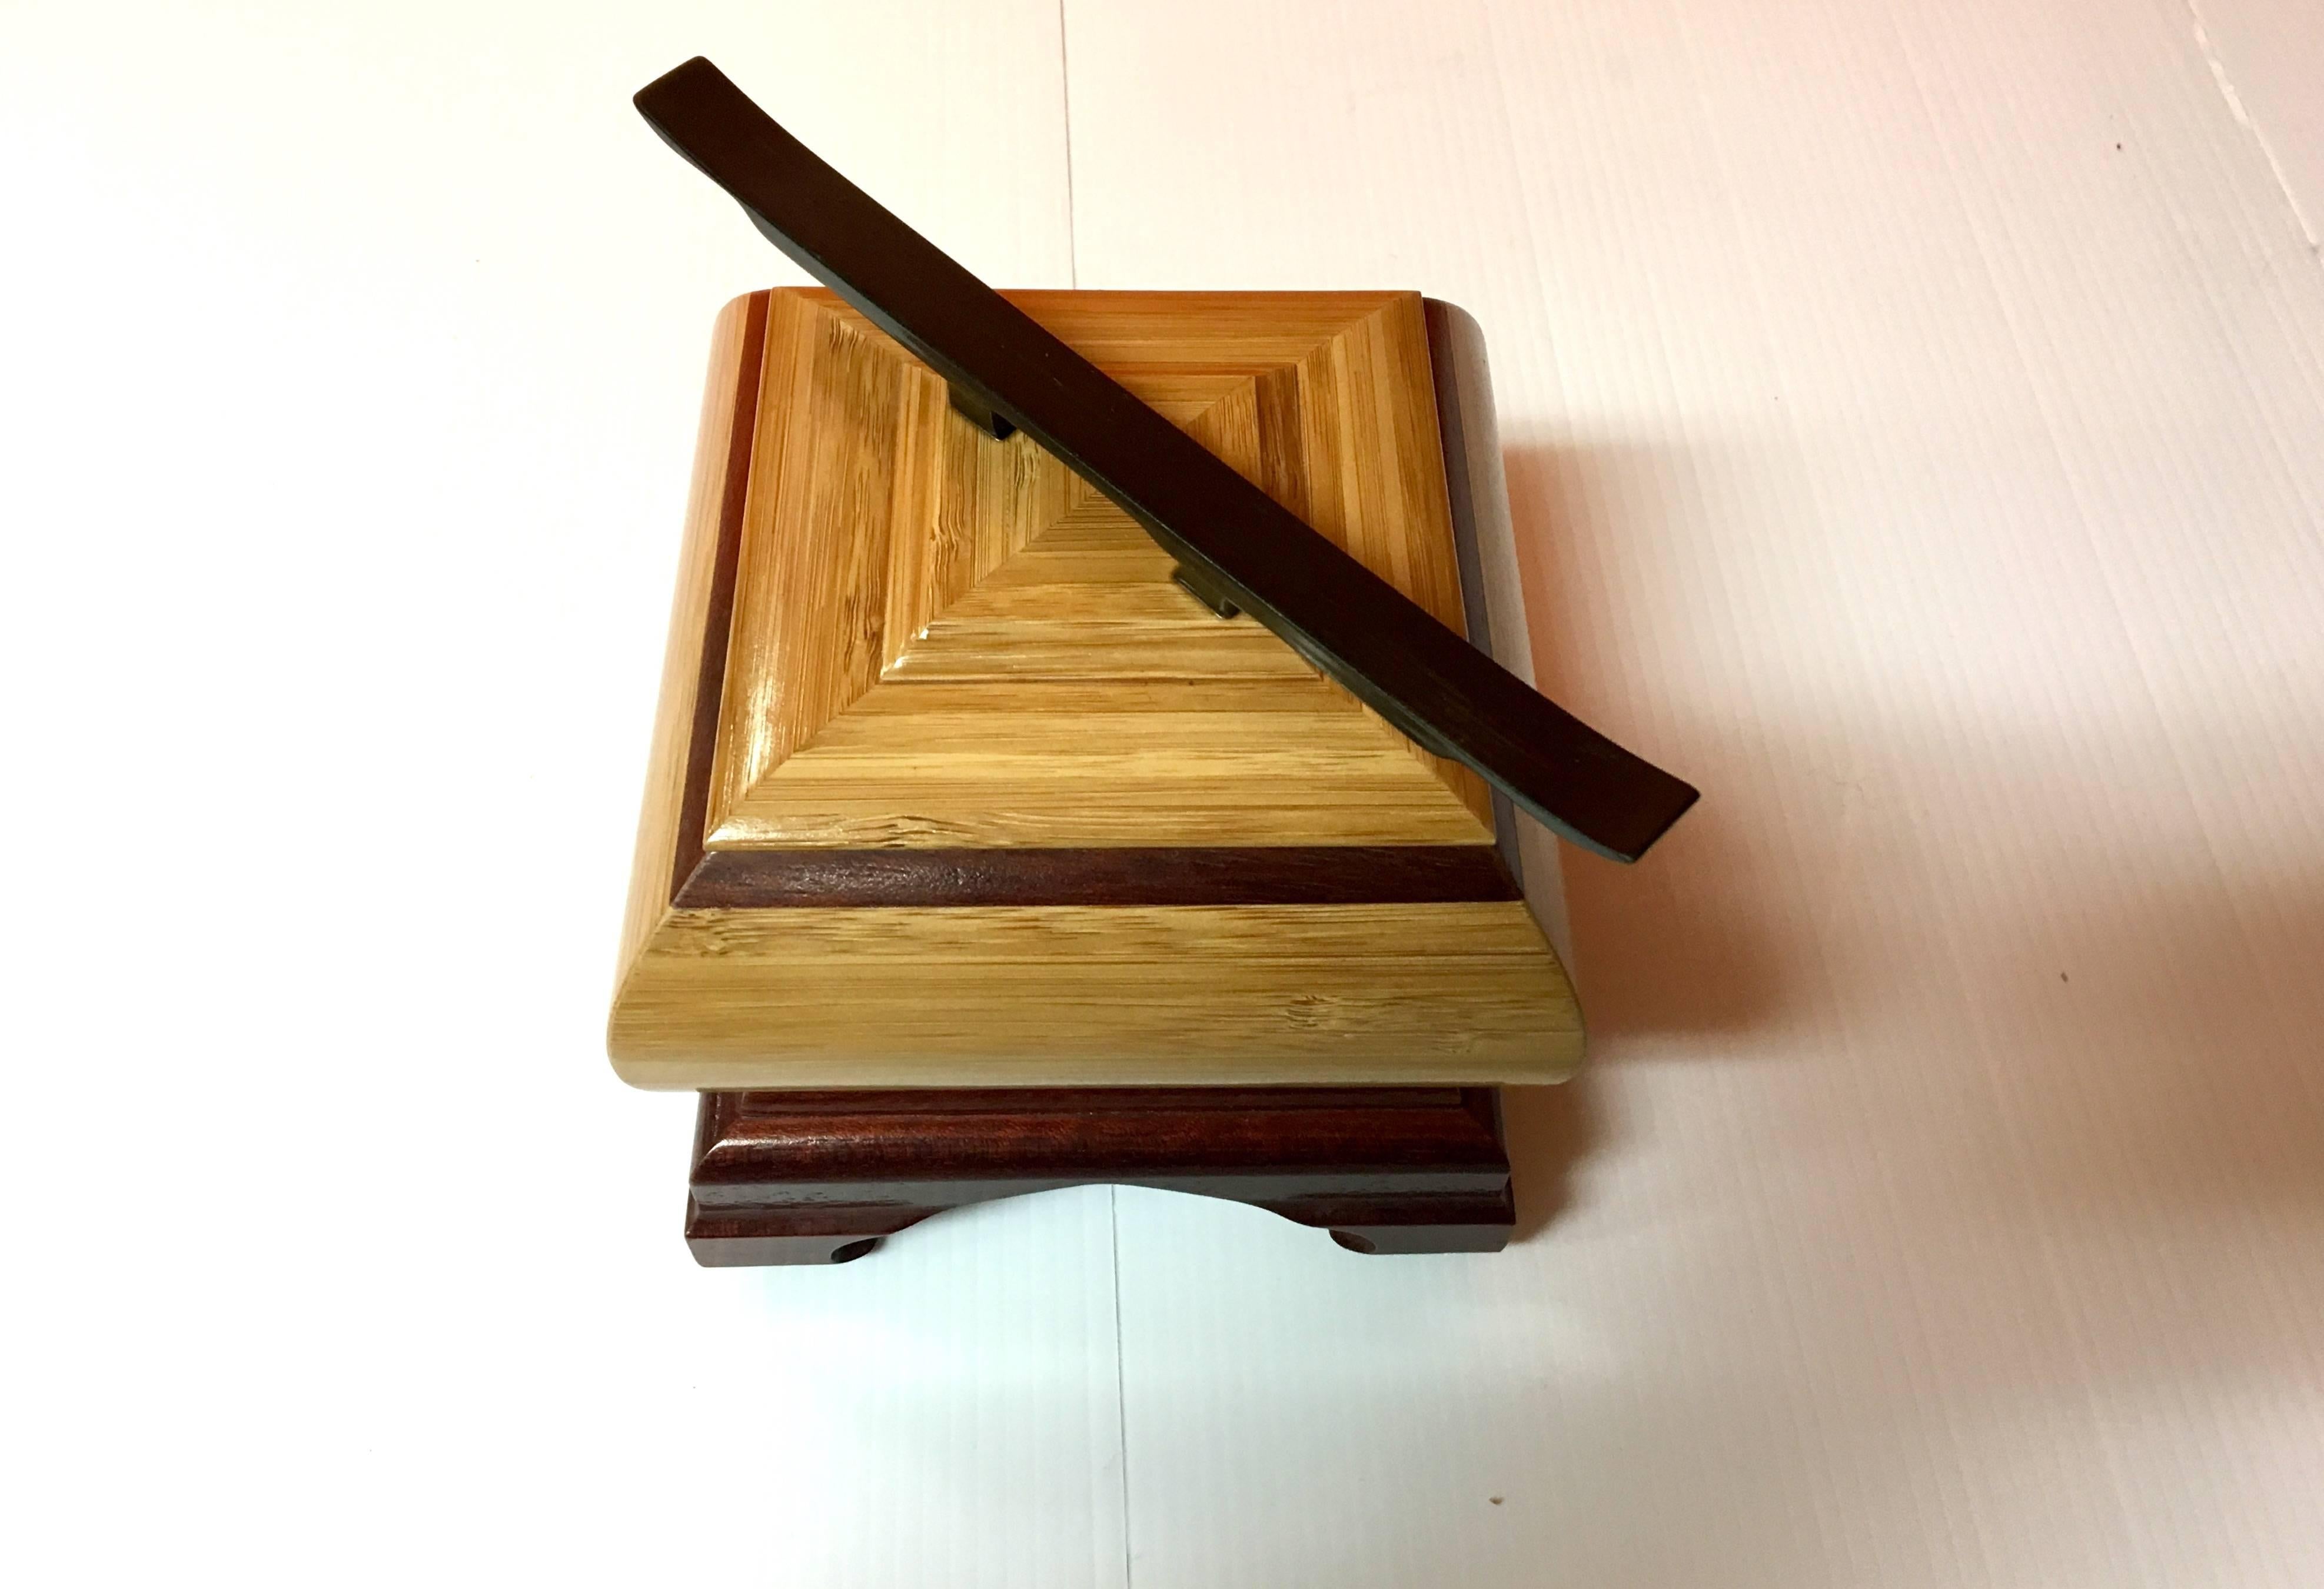 A unique walnut jewelry box handcrafted and signed by the artist in 2006. The box is a mix of mahogany, oak, cherry and ebony woods. Elegant design and styling. Truly a work of art!